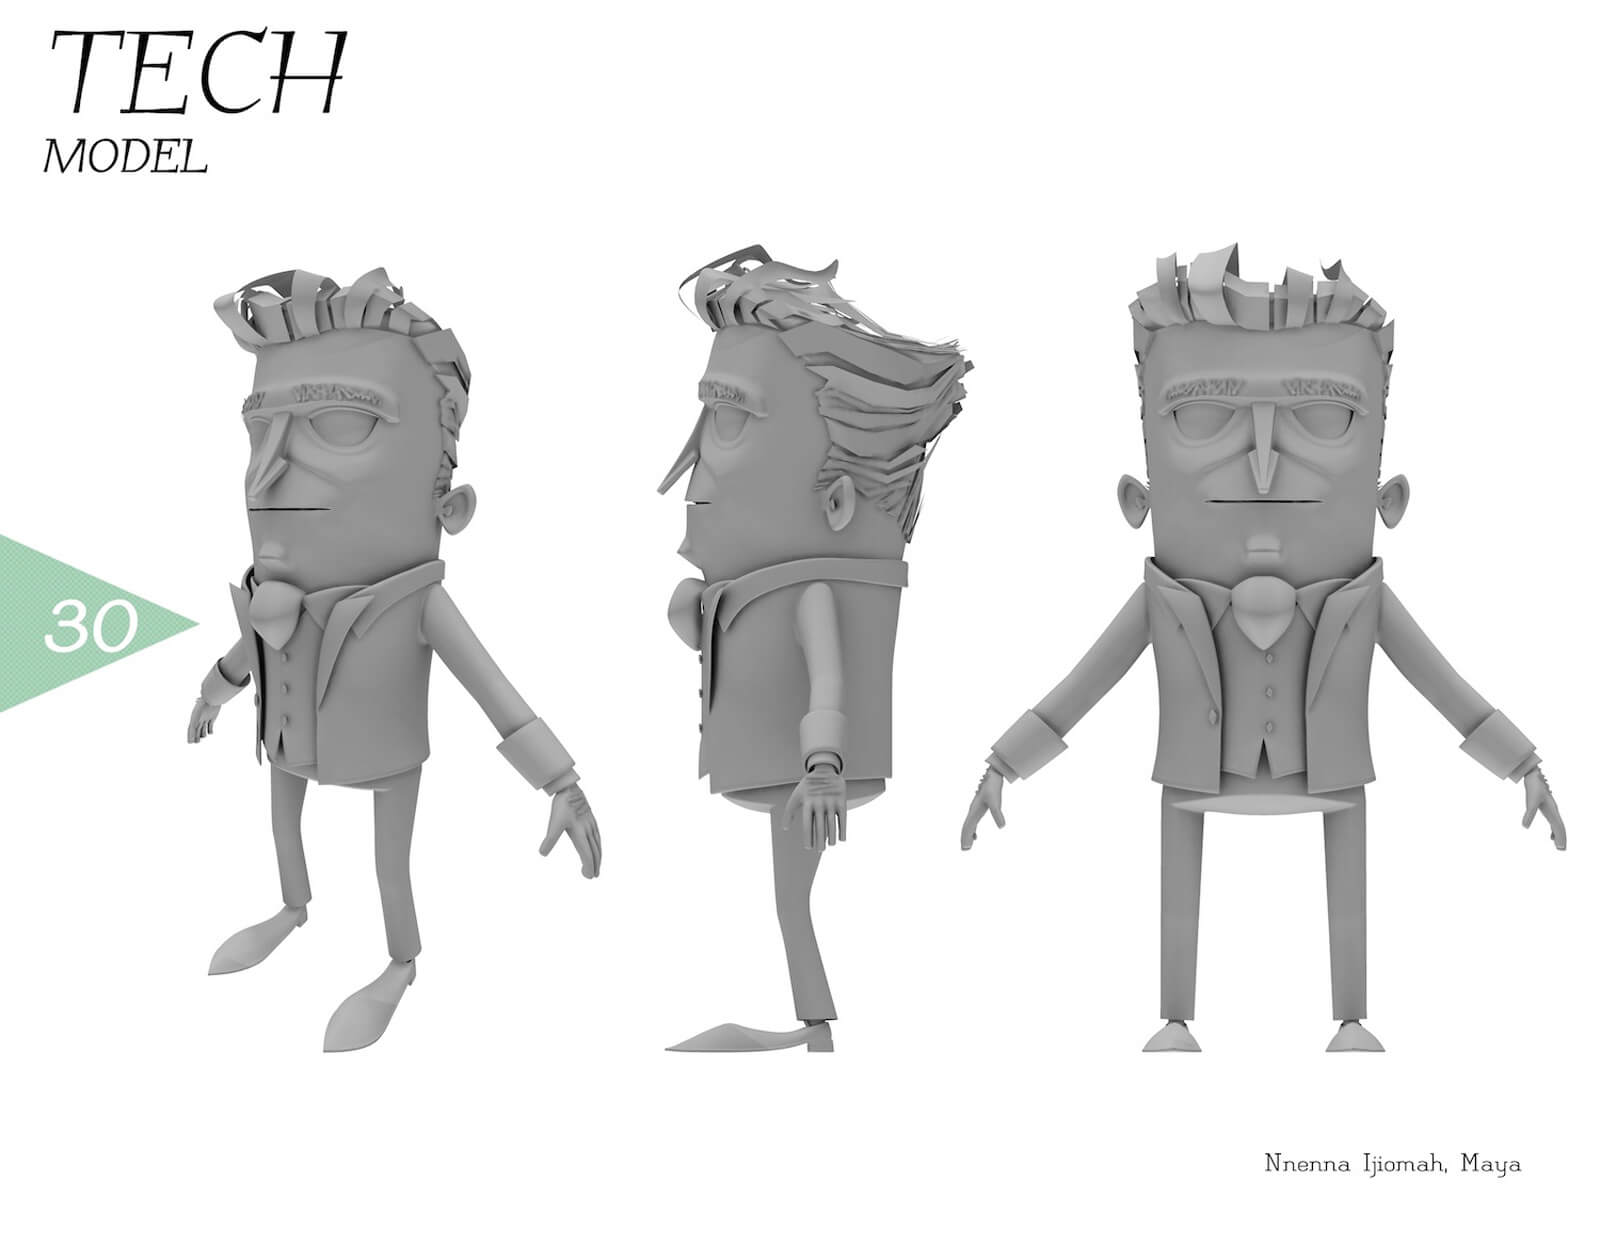 3D tech model of a man with a large head and wearing a suit from different angles. The color of the character is gray.